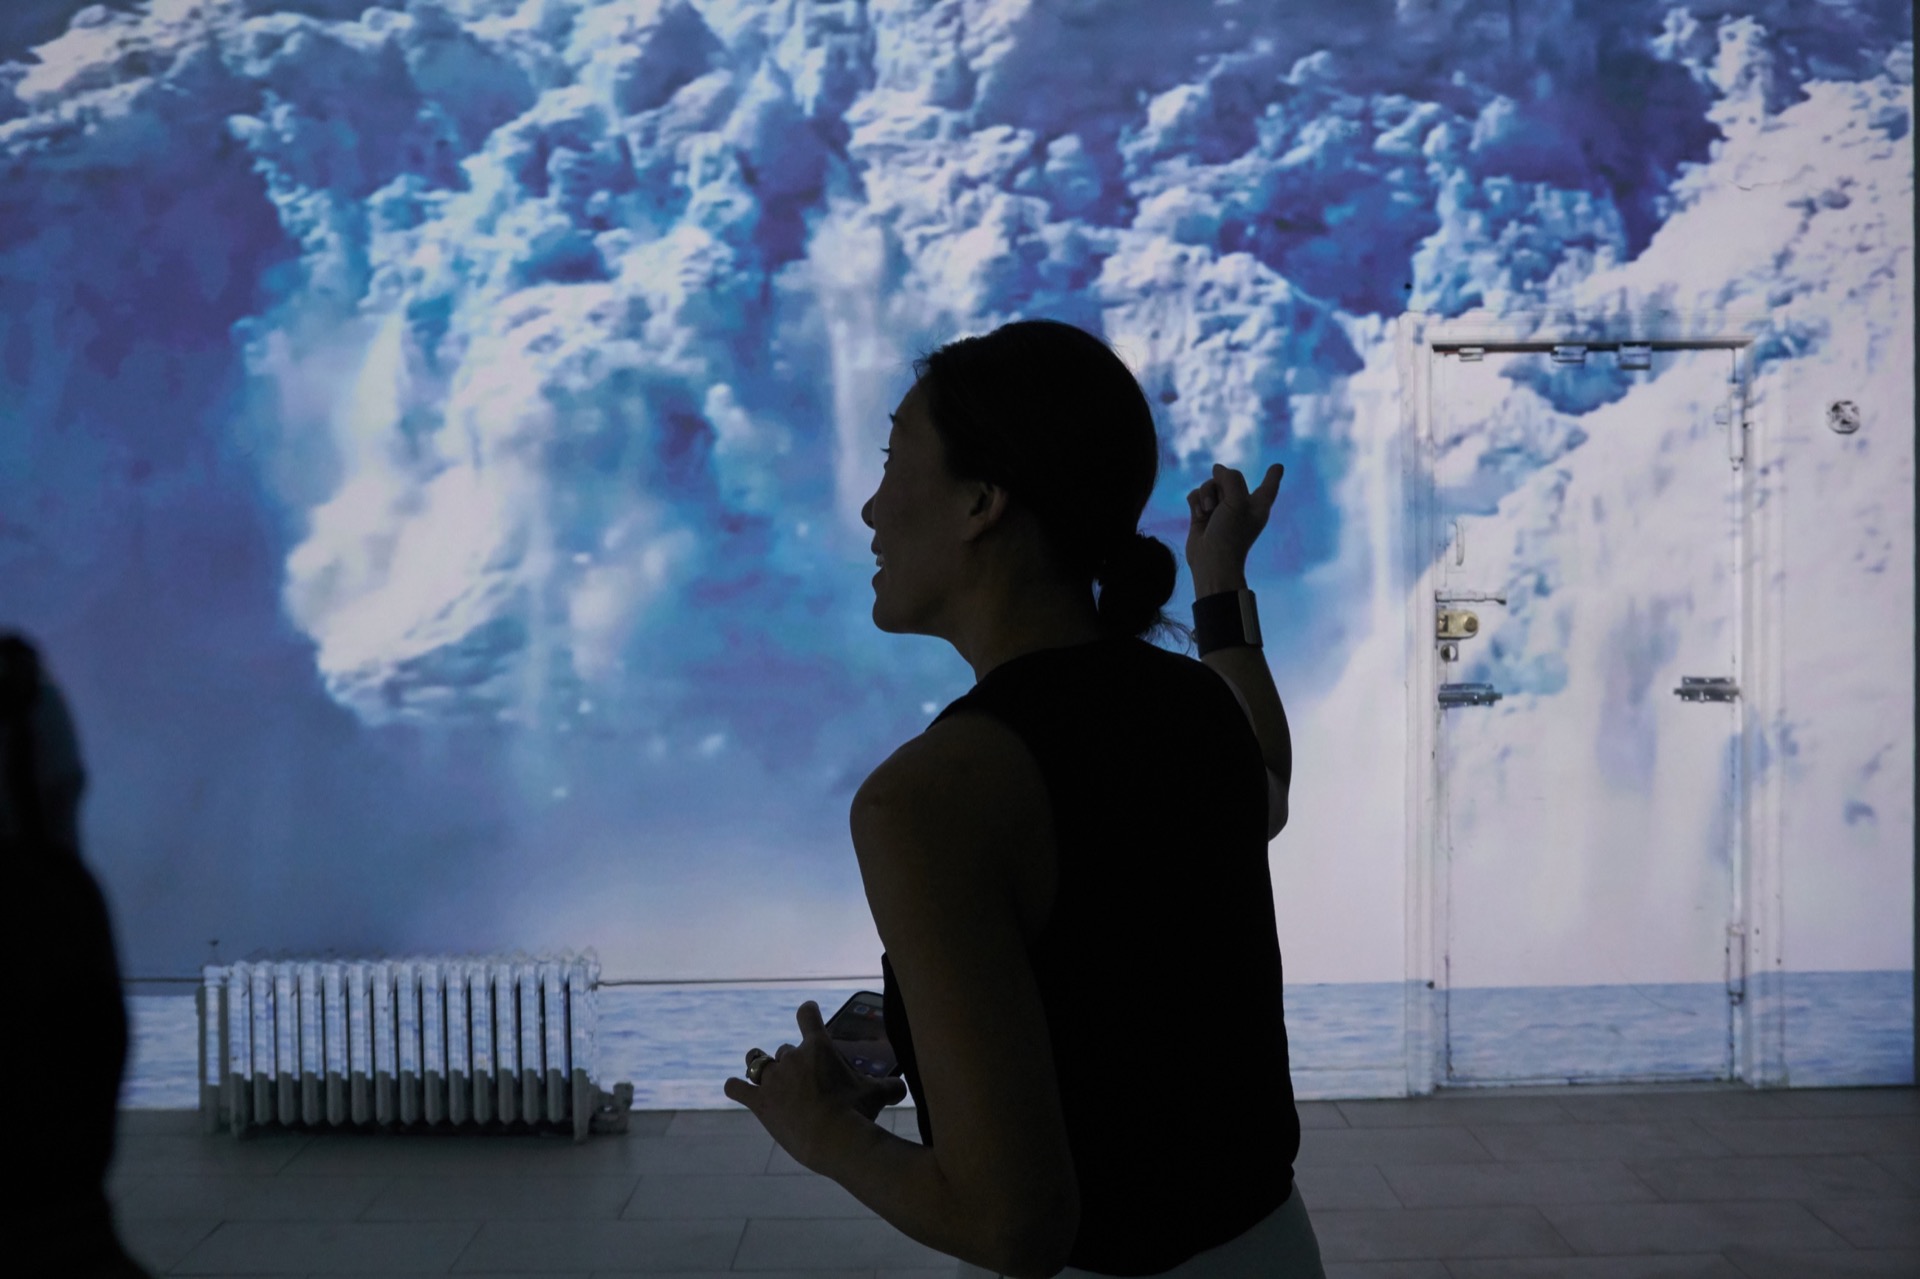 Close-up photograph of a person's head, in 3/4 profile in the middle of the frame. She is pointing to the wall behind her, onto which is projected an image of a glacier collapsing. She appears to be saying something.